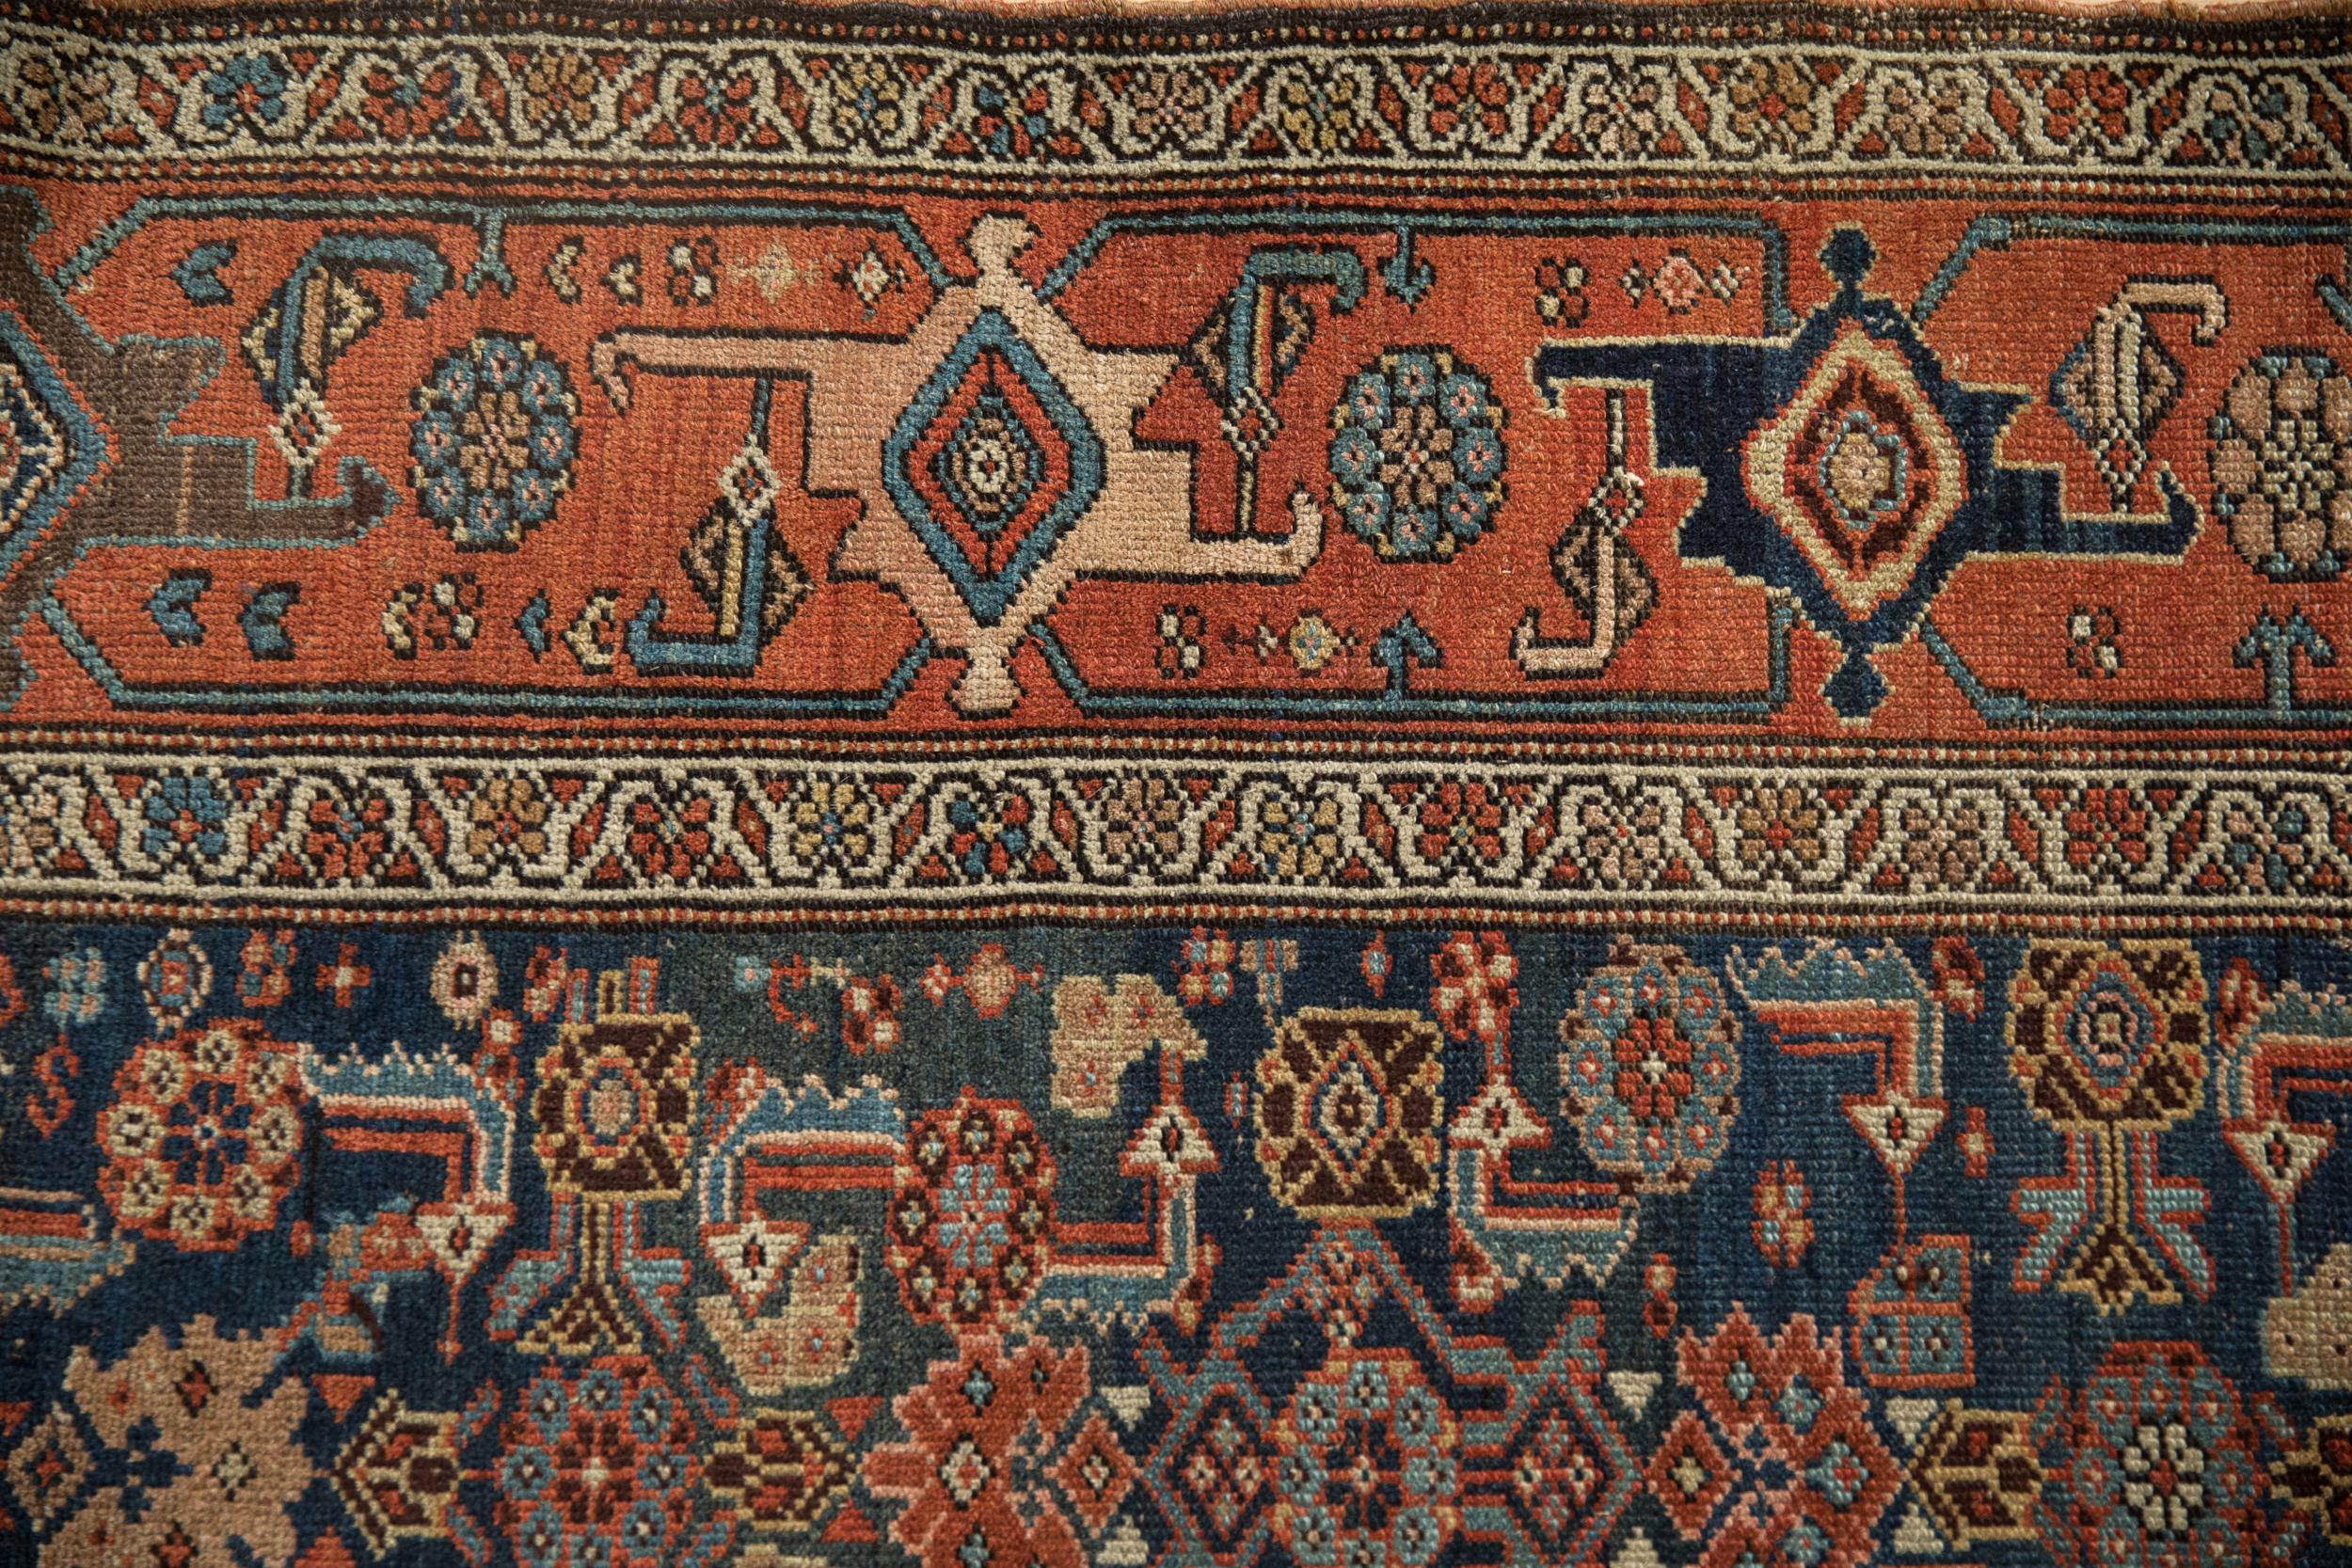 :: Main field in a geometric Herati design motif with wide banded Samovar stylized main border. Colors and shades include: Navy blue, terracotta, dusty sky blue, aubergine, antique ivory, dusty sapphire blue, cobalt blue, powder blue, coffee brown,